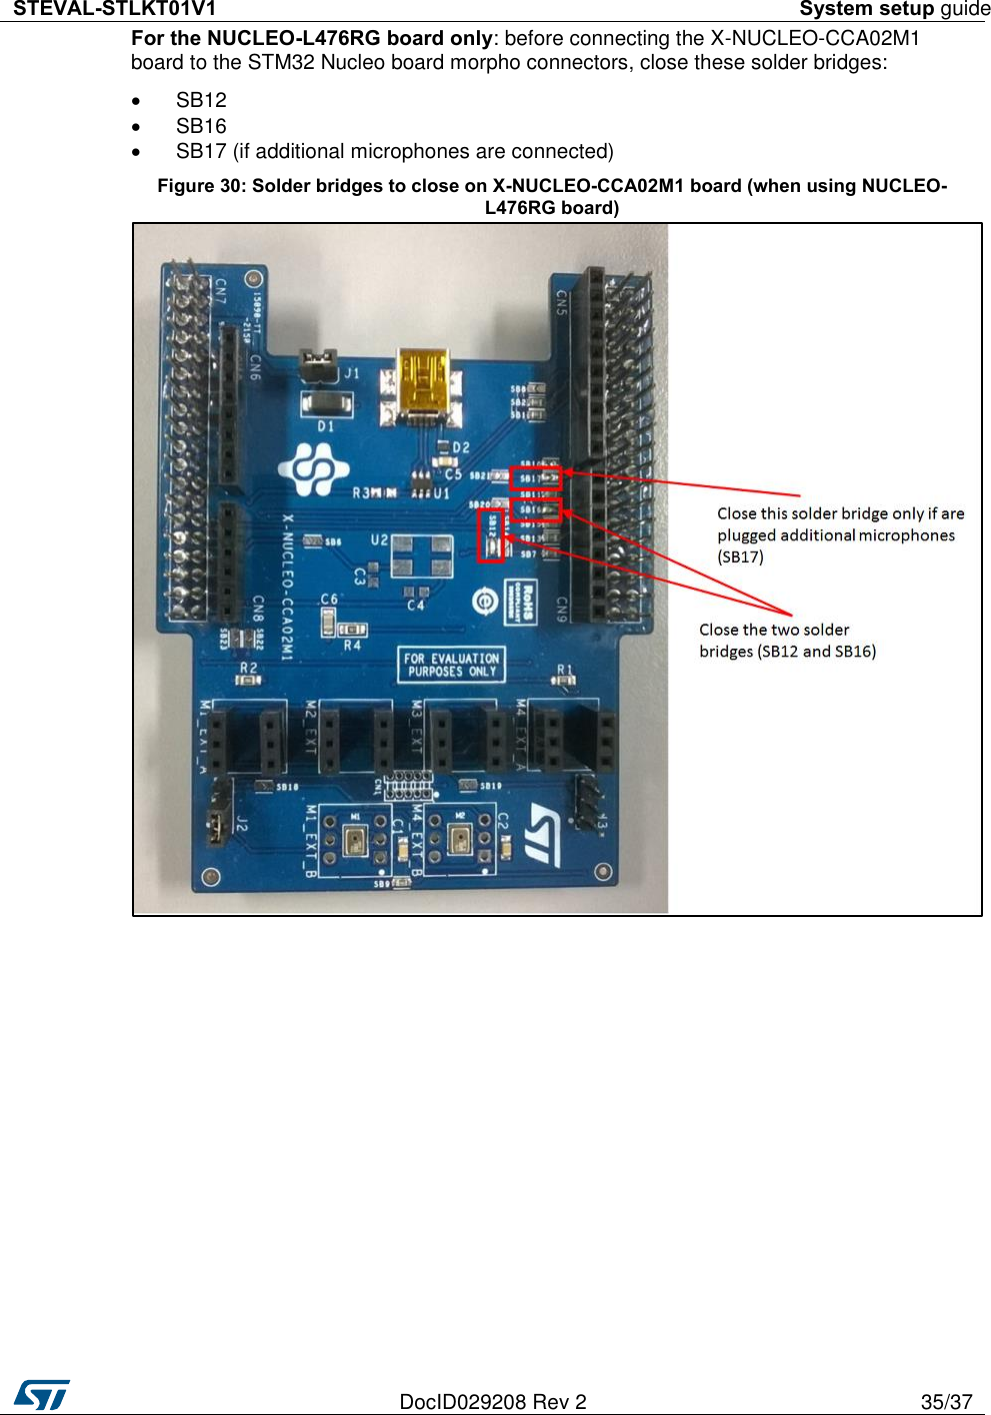 STEVAL-STLKT01V1 System setup guide   DocID029208 Rev 2 35/37  For the NUCLEO-L476RG board only: before connecting the X-NUCLEO-CCA02M1 board to the STM32 Nucleo board morpho connectors, close these solder bridges:   SB12   SB16   SB17 (if additional microphones are connected) Figure 30: Solder bridges to close on X-NUCLEO-CCA02M1 board (when using NUCLEO-L476RG board)  